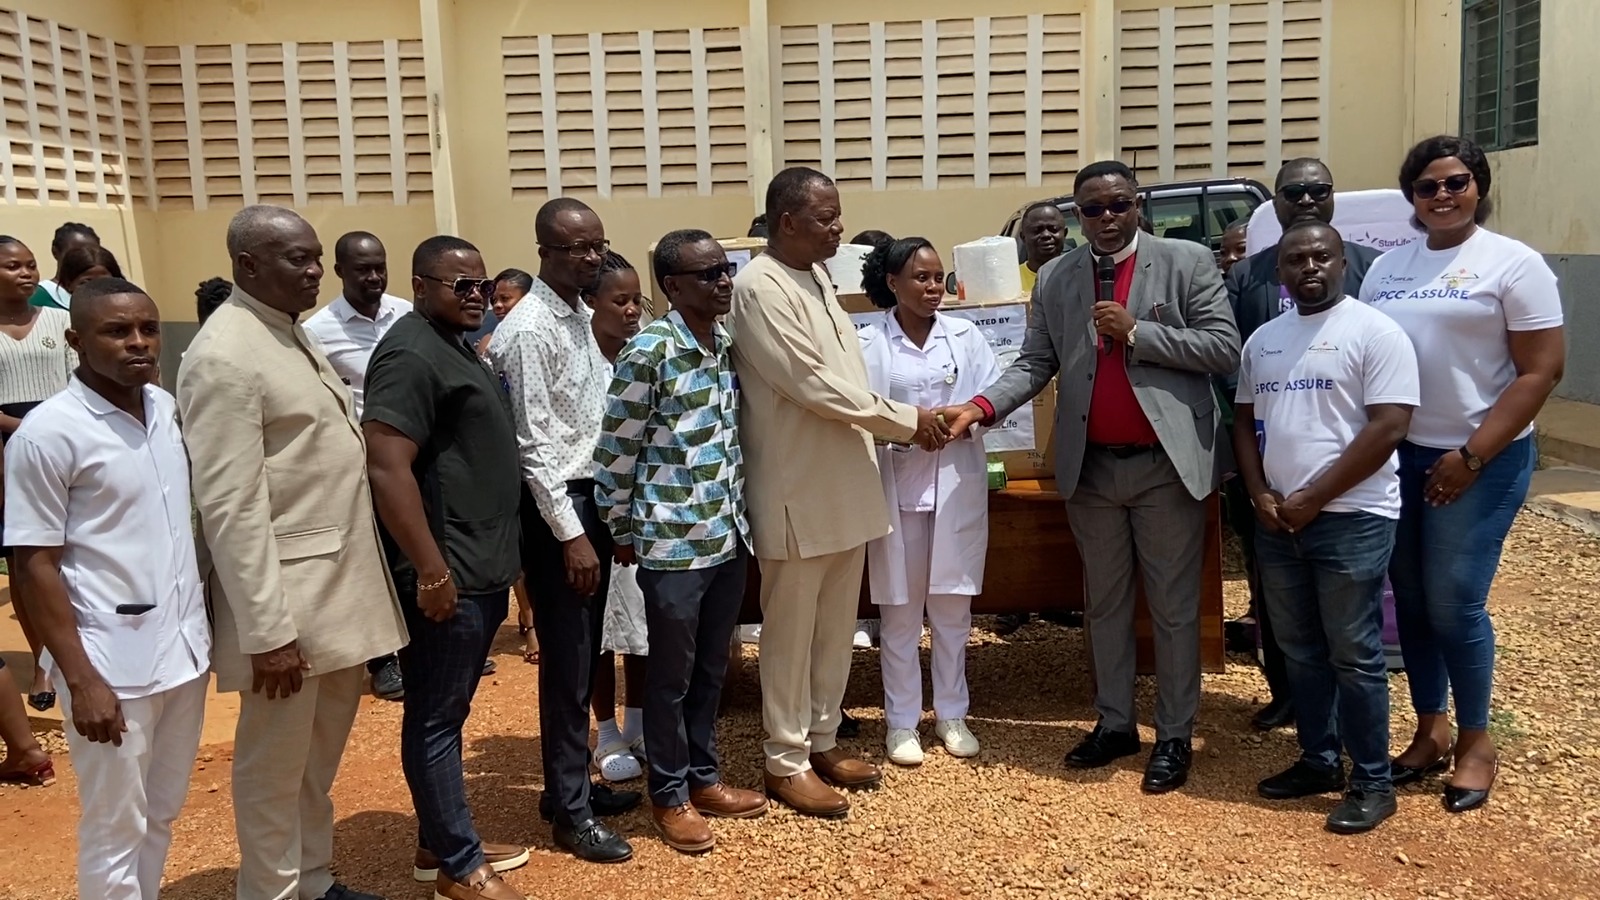 StarLife Assurance aids Global Evangelical Mission Hospital with Medical supplies [Video]